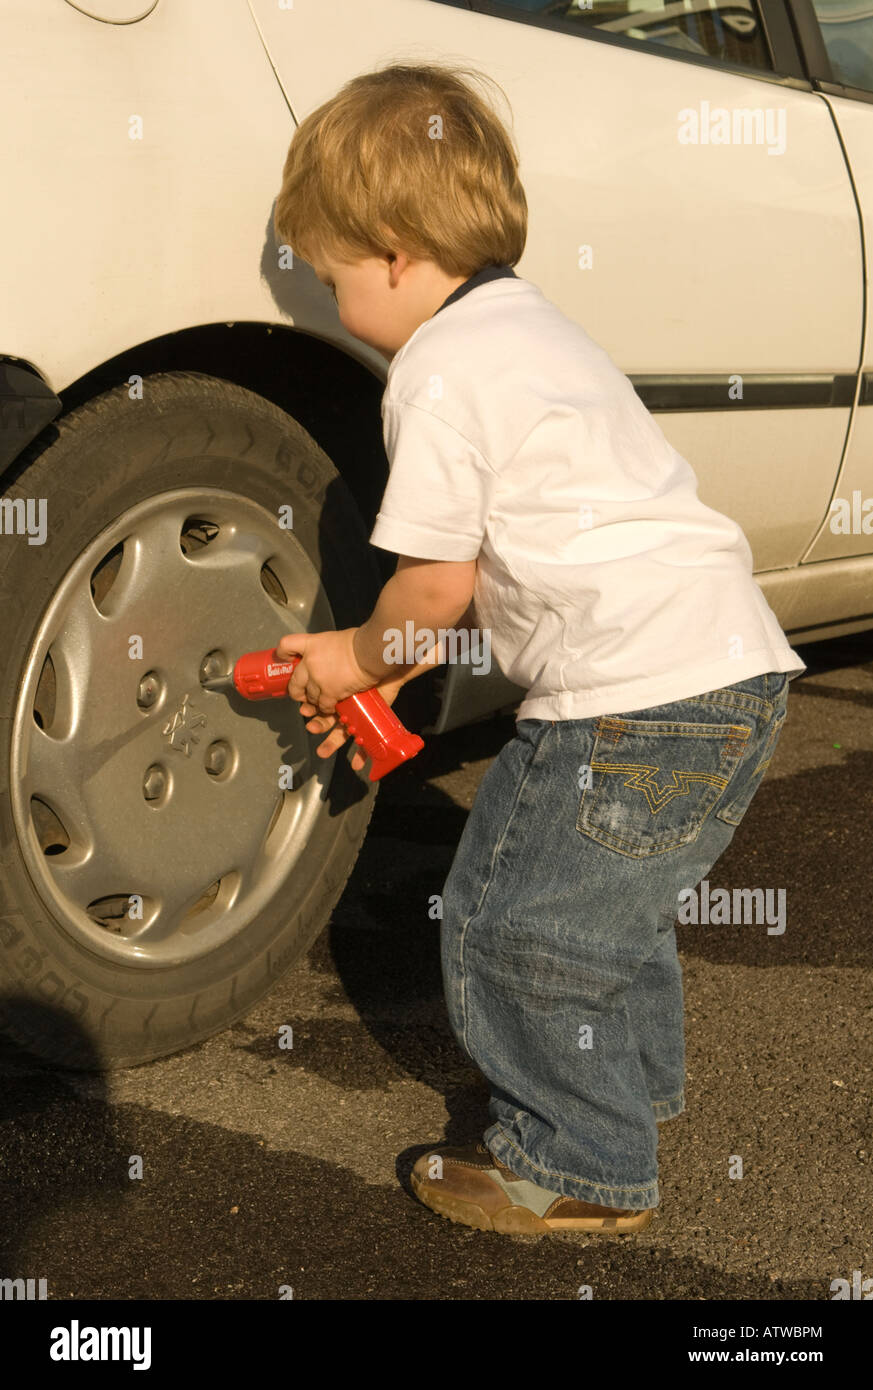 two year old boy with toy drill playing at being a mechanic working on a car Stock Photo